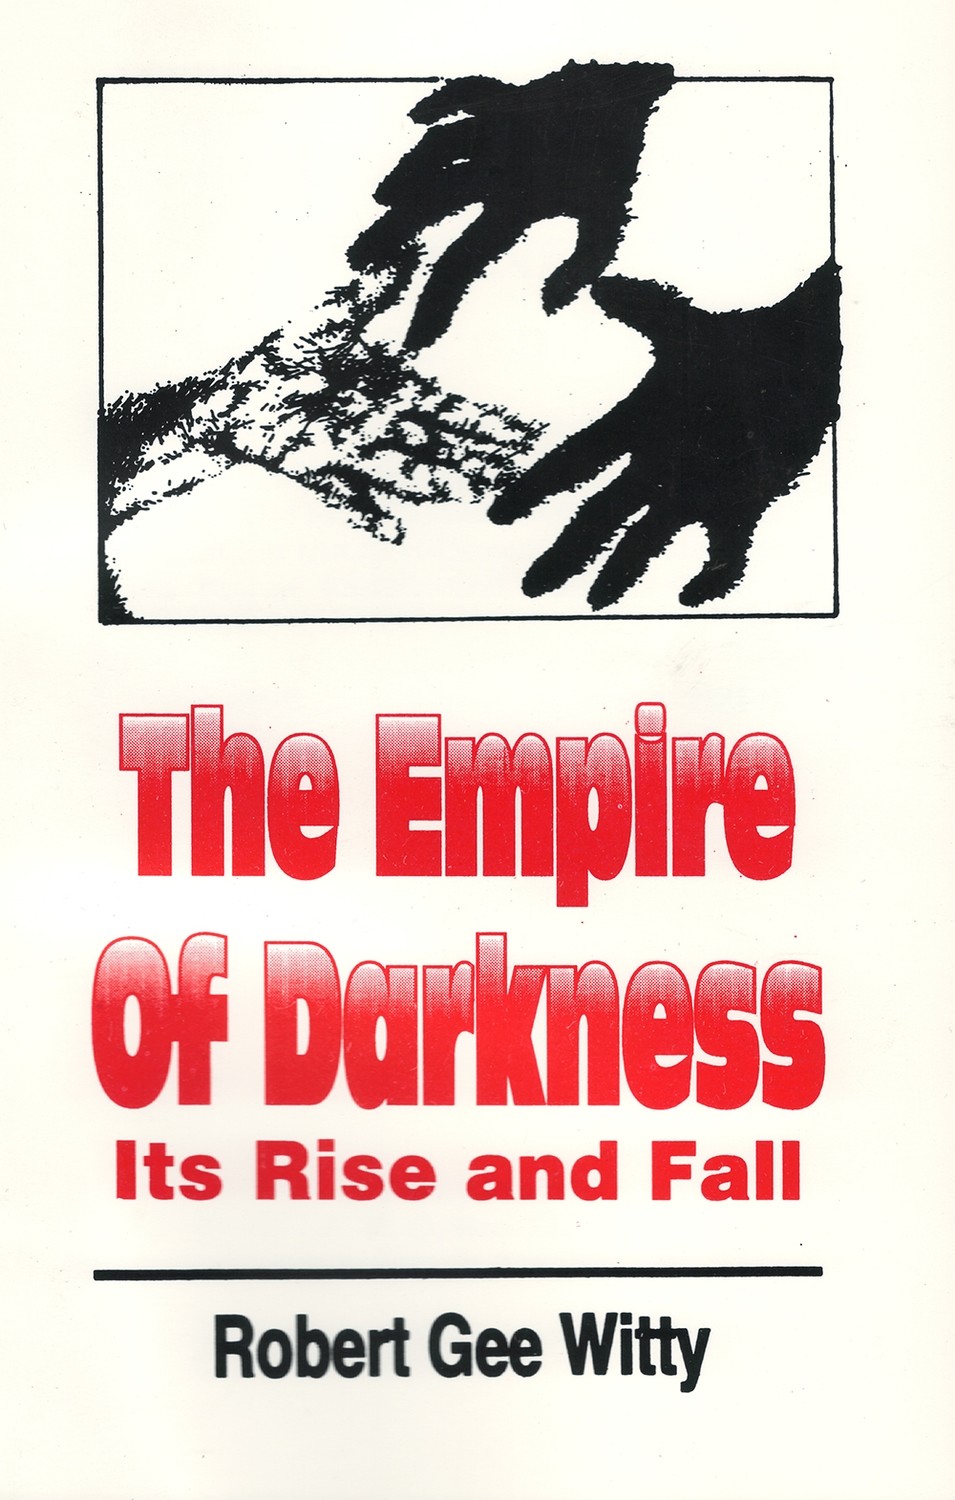 The Empire of Darkness: Its Rise and Fall by Robert Gee Witty